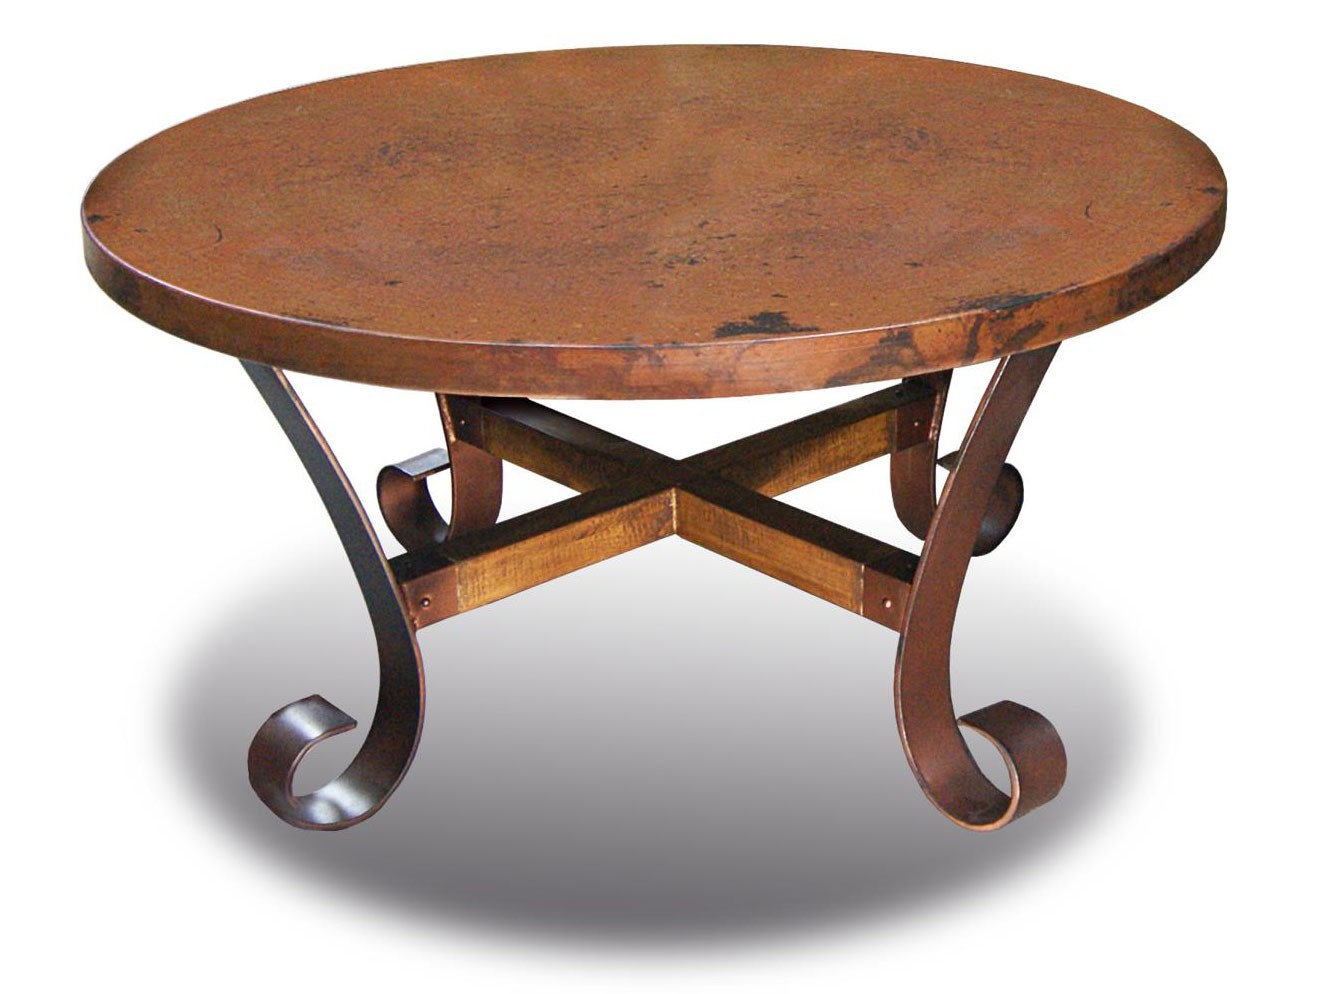 Copper coffee table round copper table hammered table